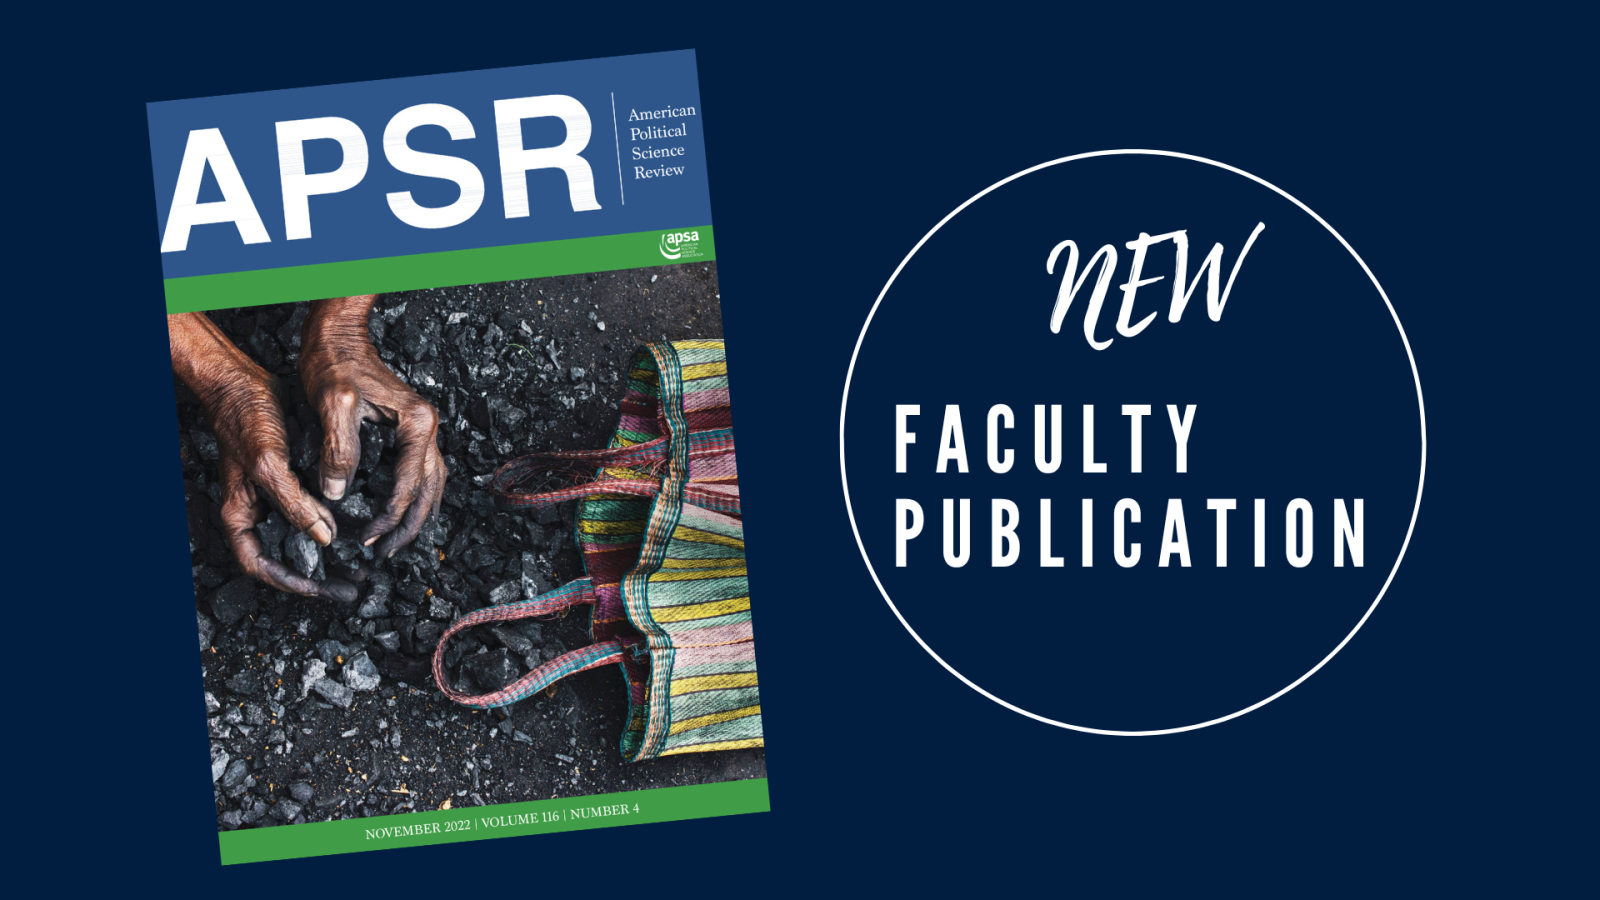 Banner that says &quot;New Faculty Publications&quot; and includes an image of the cover of APSR Journal